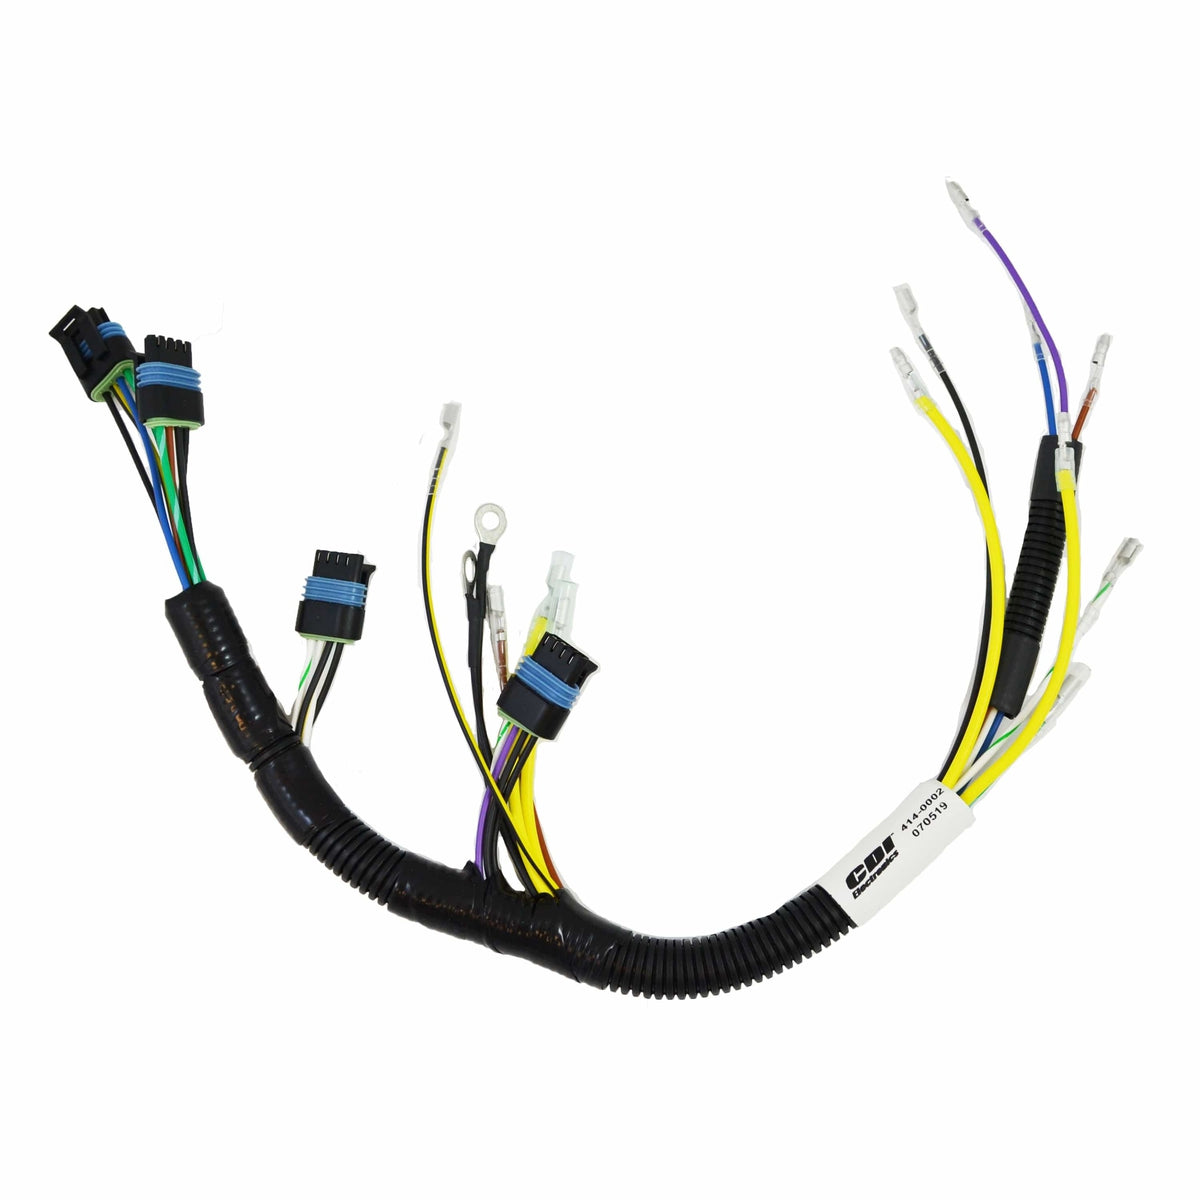 CDI Wiring Harness for Mercury/Mariner 4 Cylinder Engines #414-0002